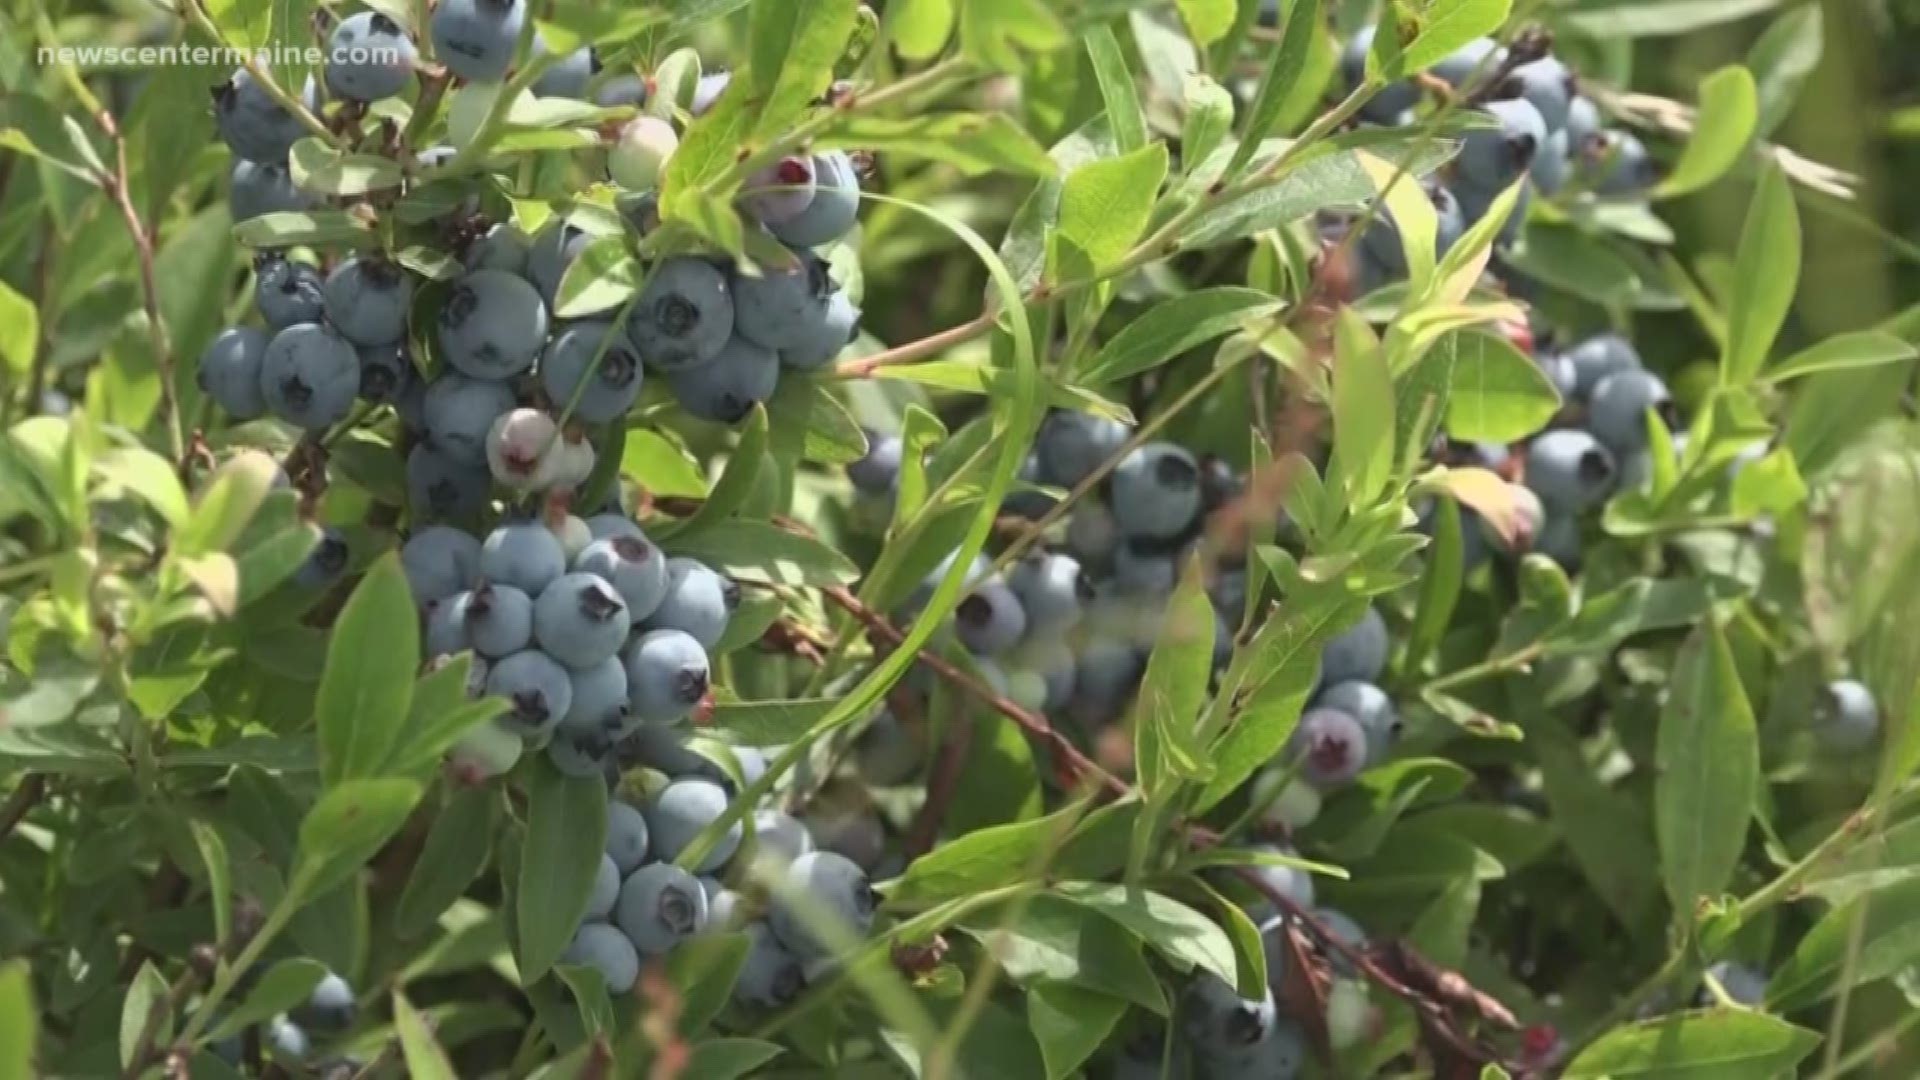 Tariffs are hitting Maine's blueberry and lobster industries hard. Maine's congressional delegation is urging the USDA to protect wild blueberry farmers from the trade war with China.